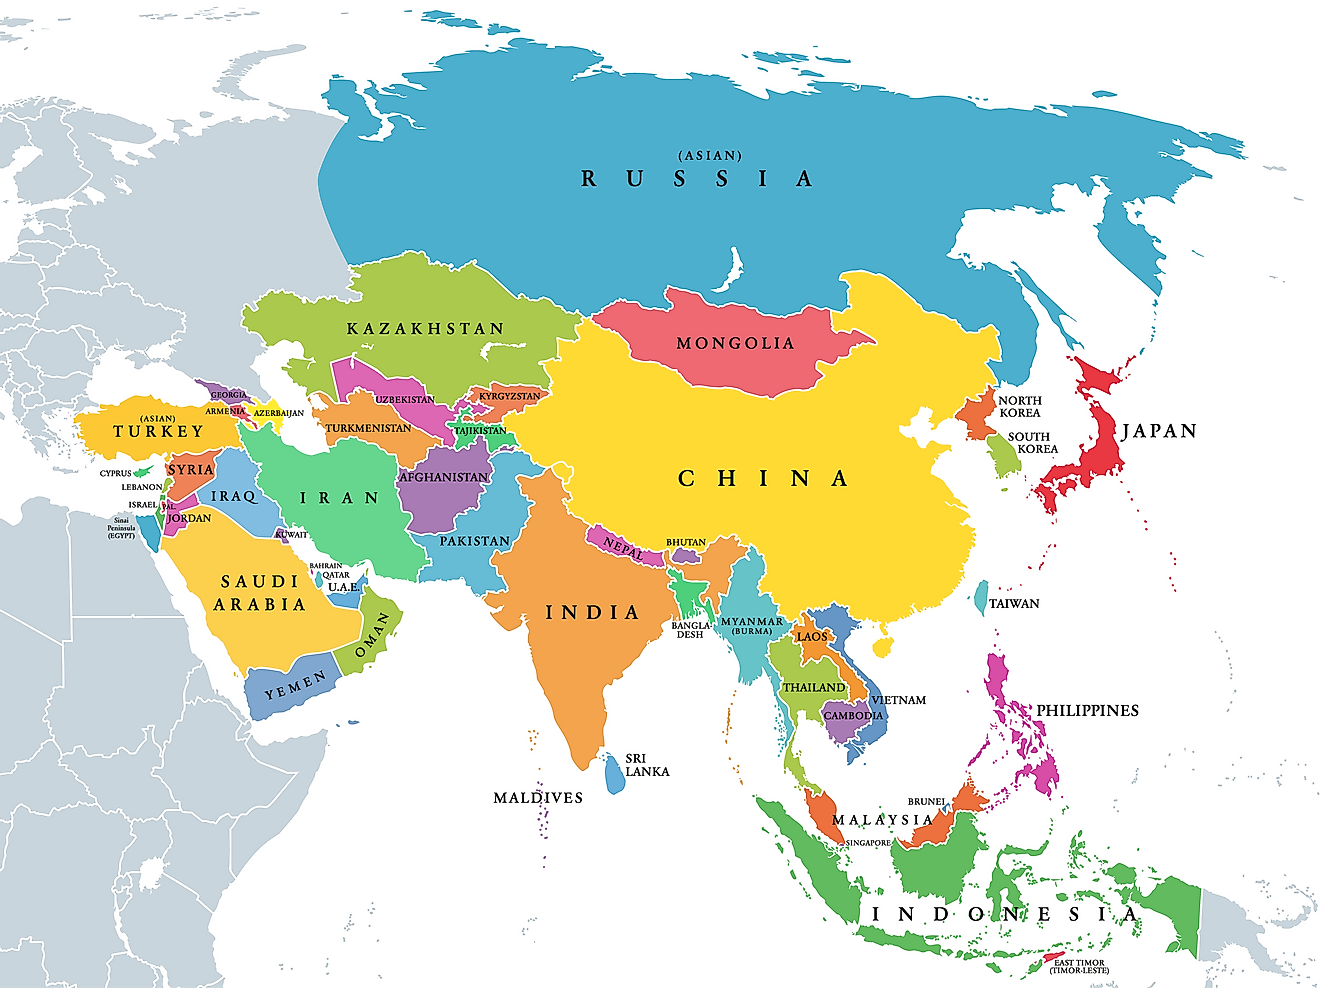 How Many Countries Are There In Asia?